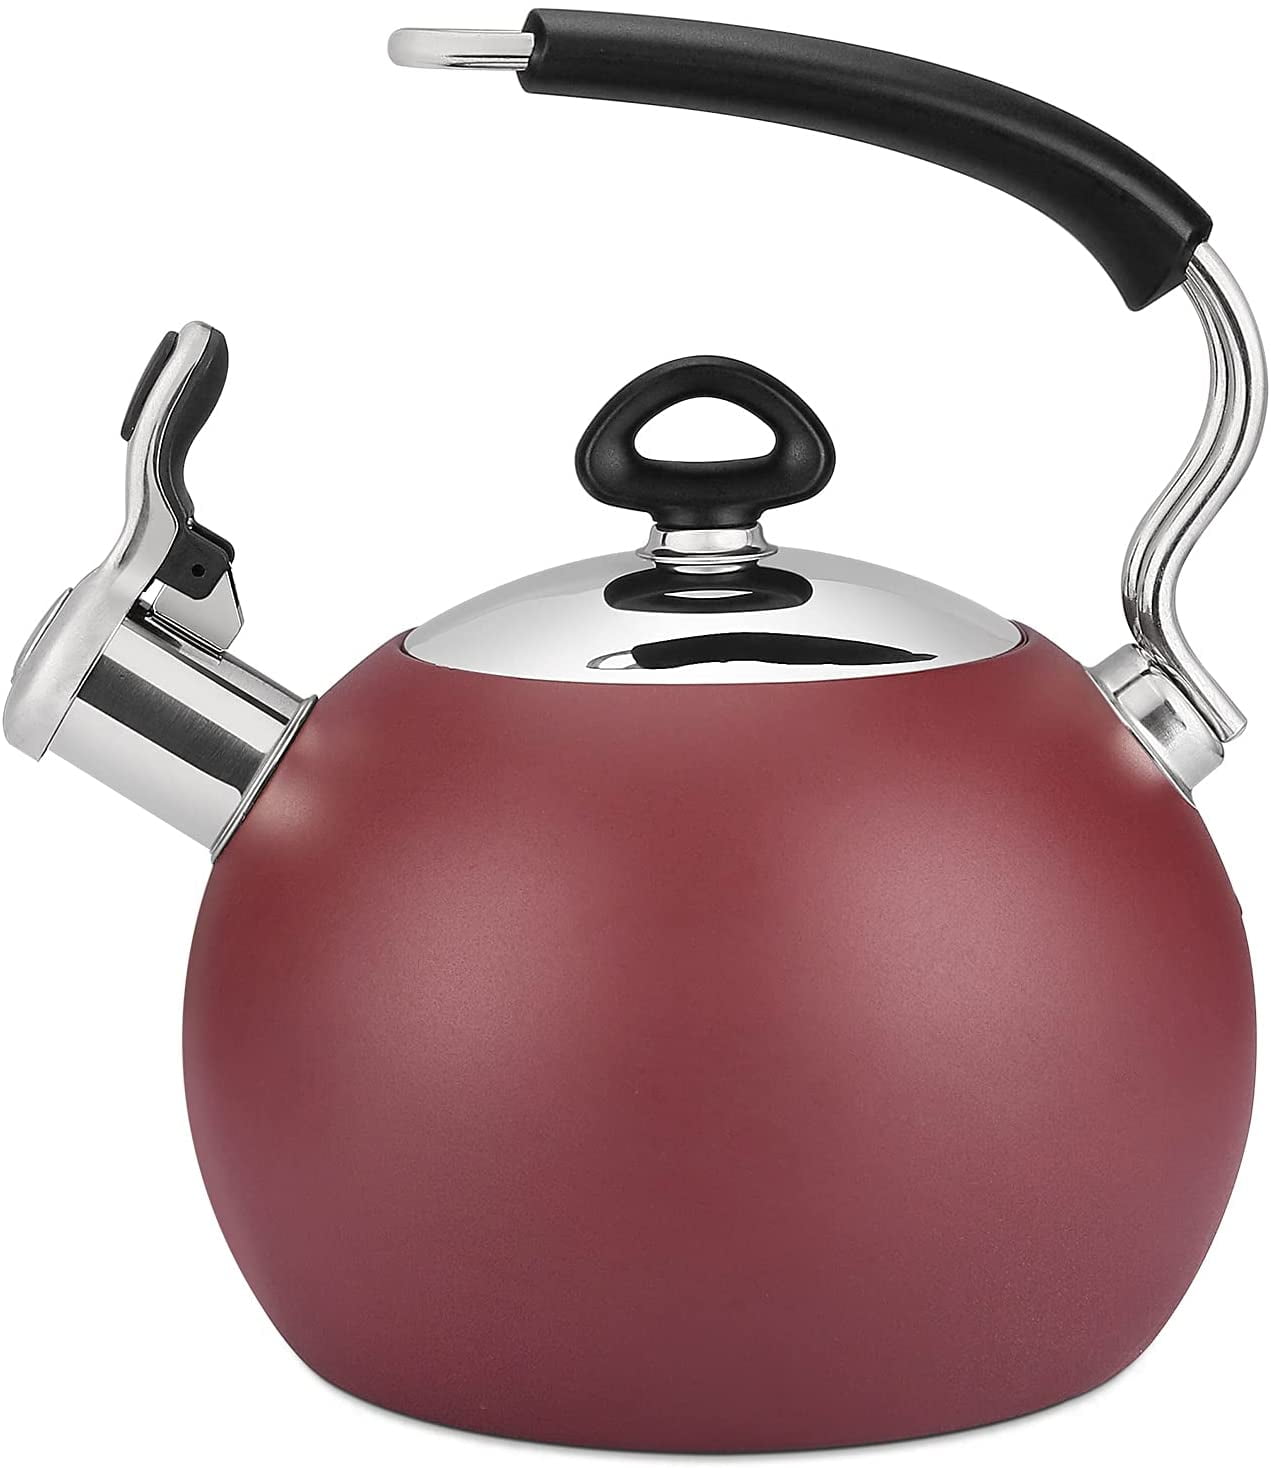 2.8 Quarts/3 Liter VICALINA Whistling Stainless Steel Tea Kettle Stove Top Tea Pot Metallic Finish Metallic Red Stay Cool Handle with Trigger 